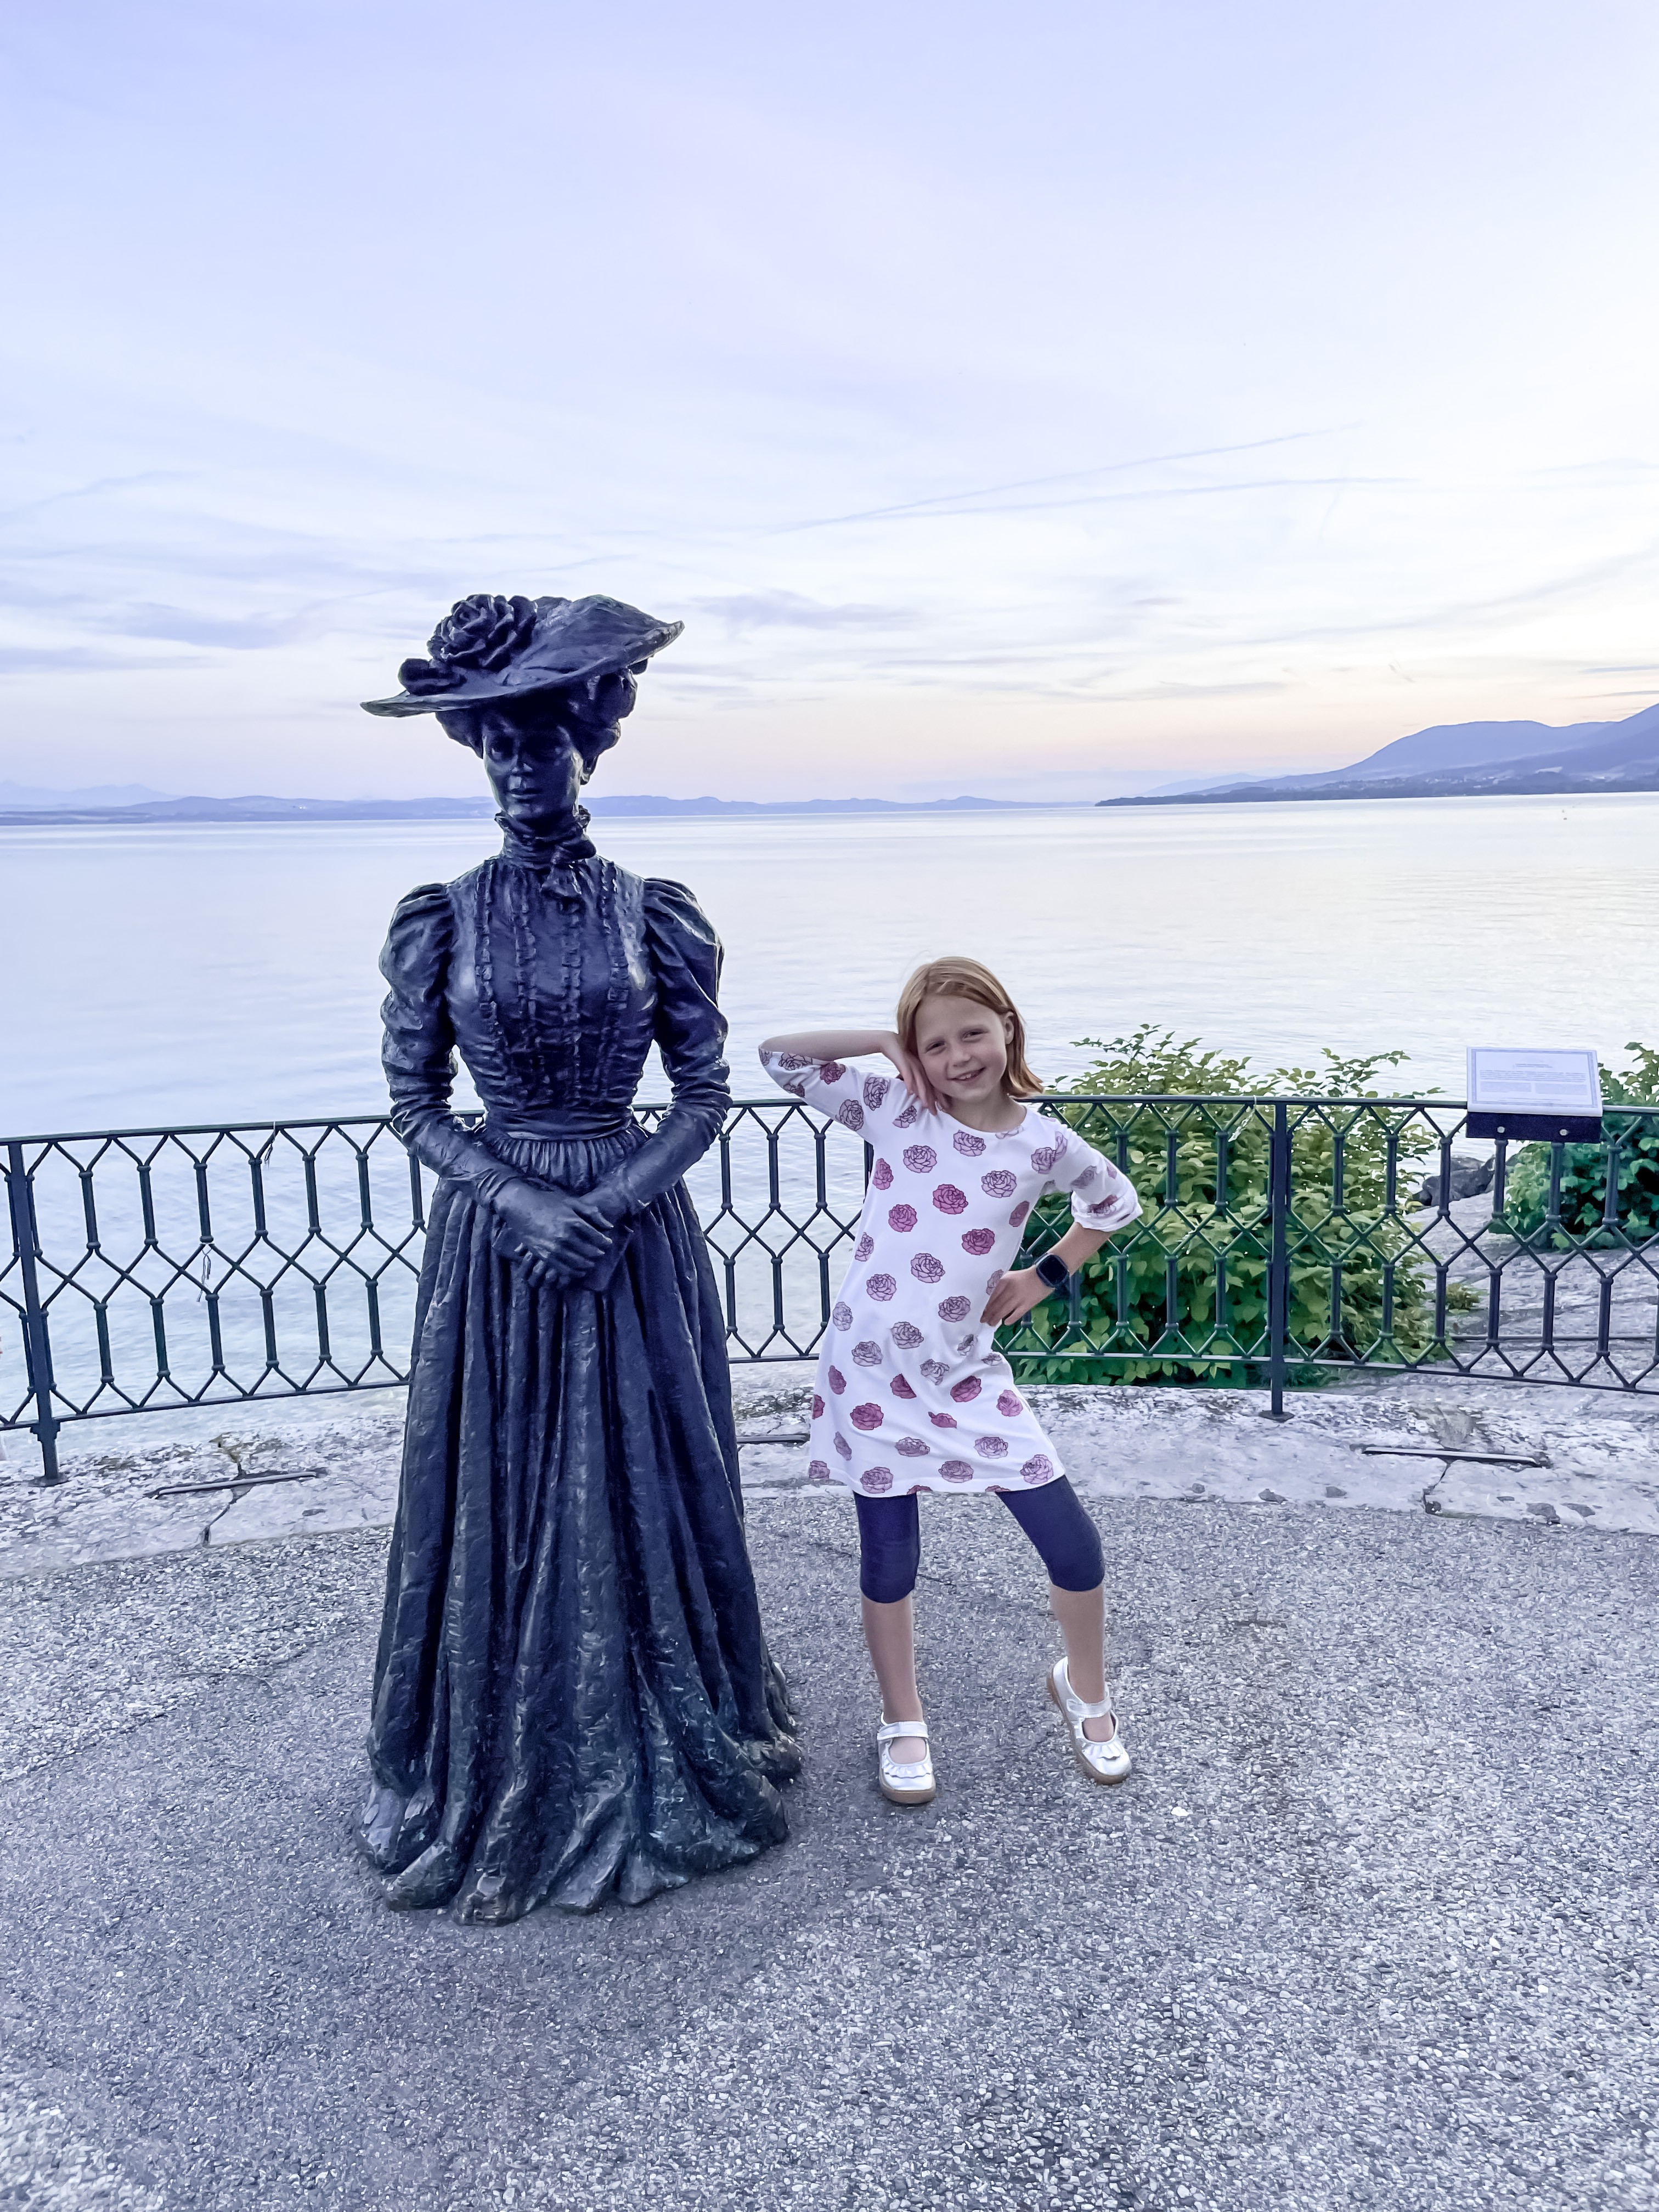 WHAT IS THERE TO DO IN NEUCHÂTEL WITH CHILDREN?